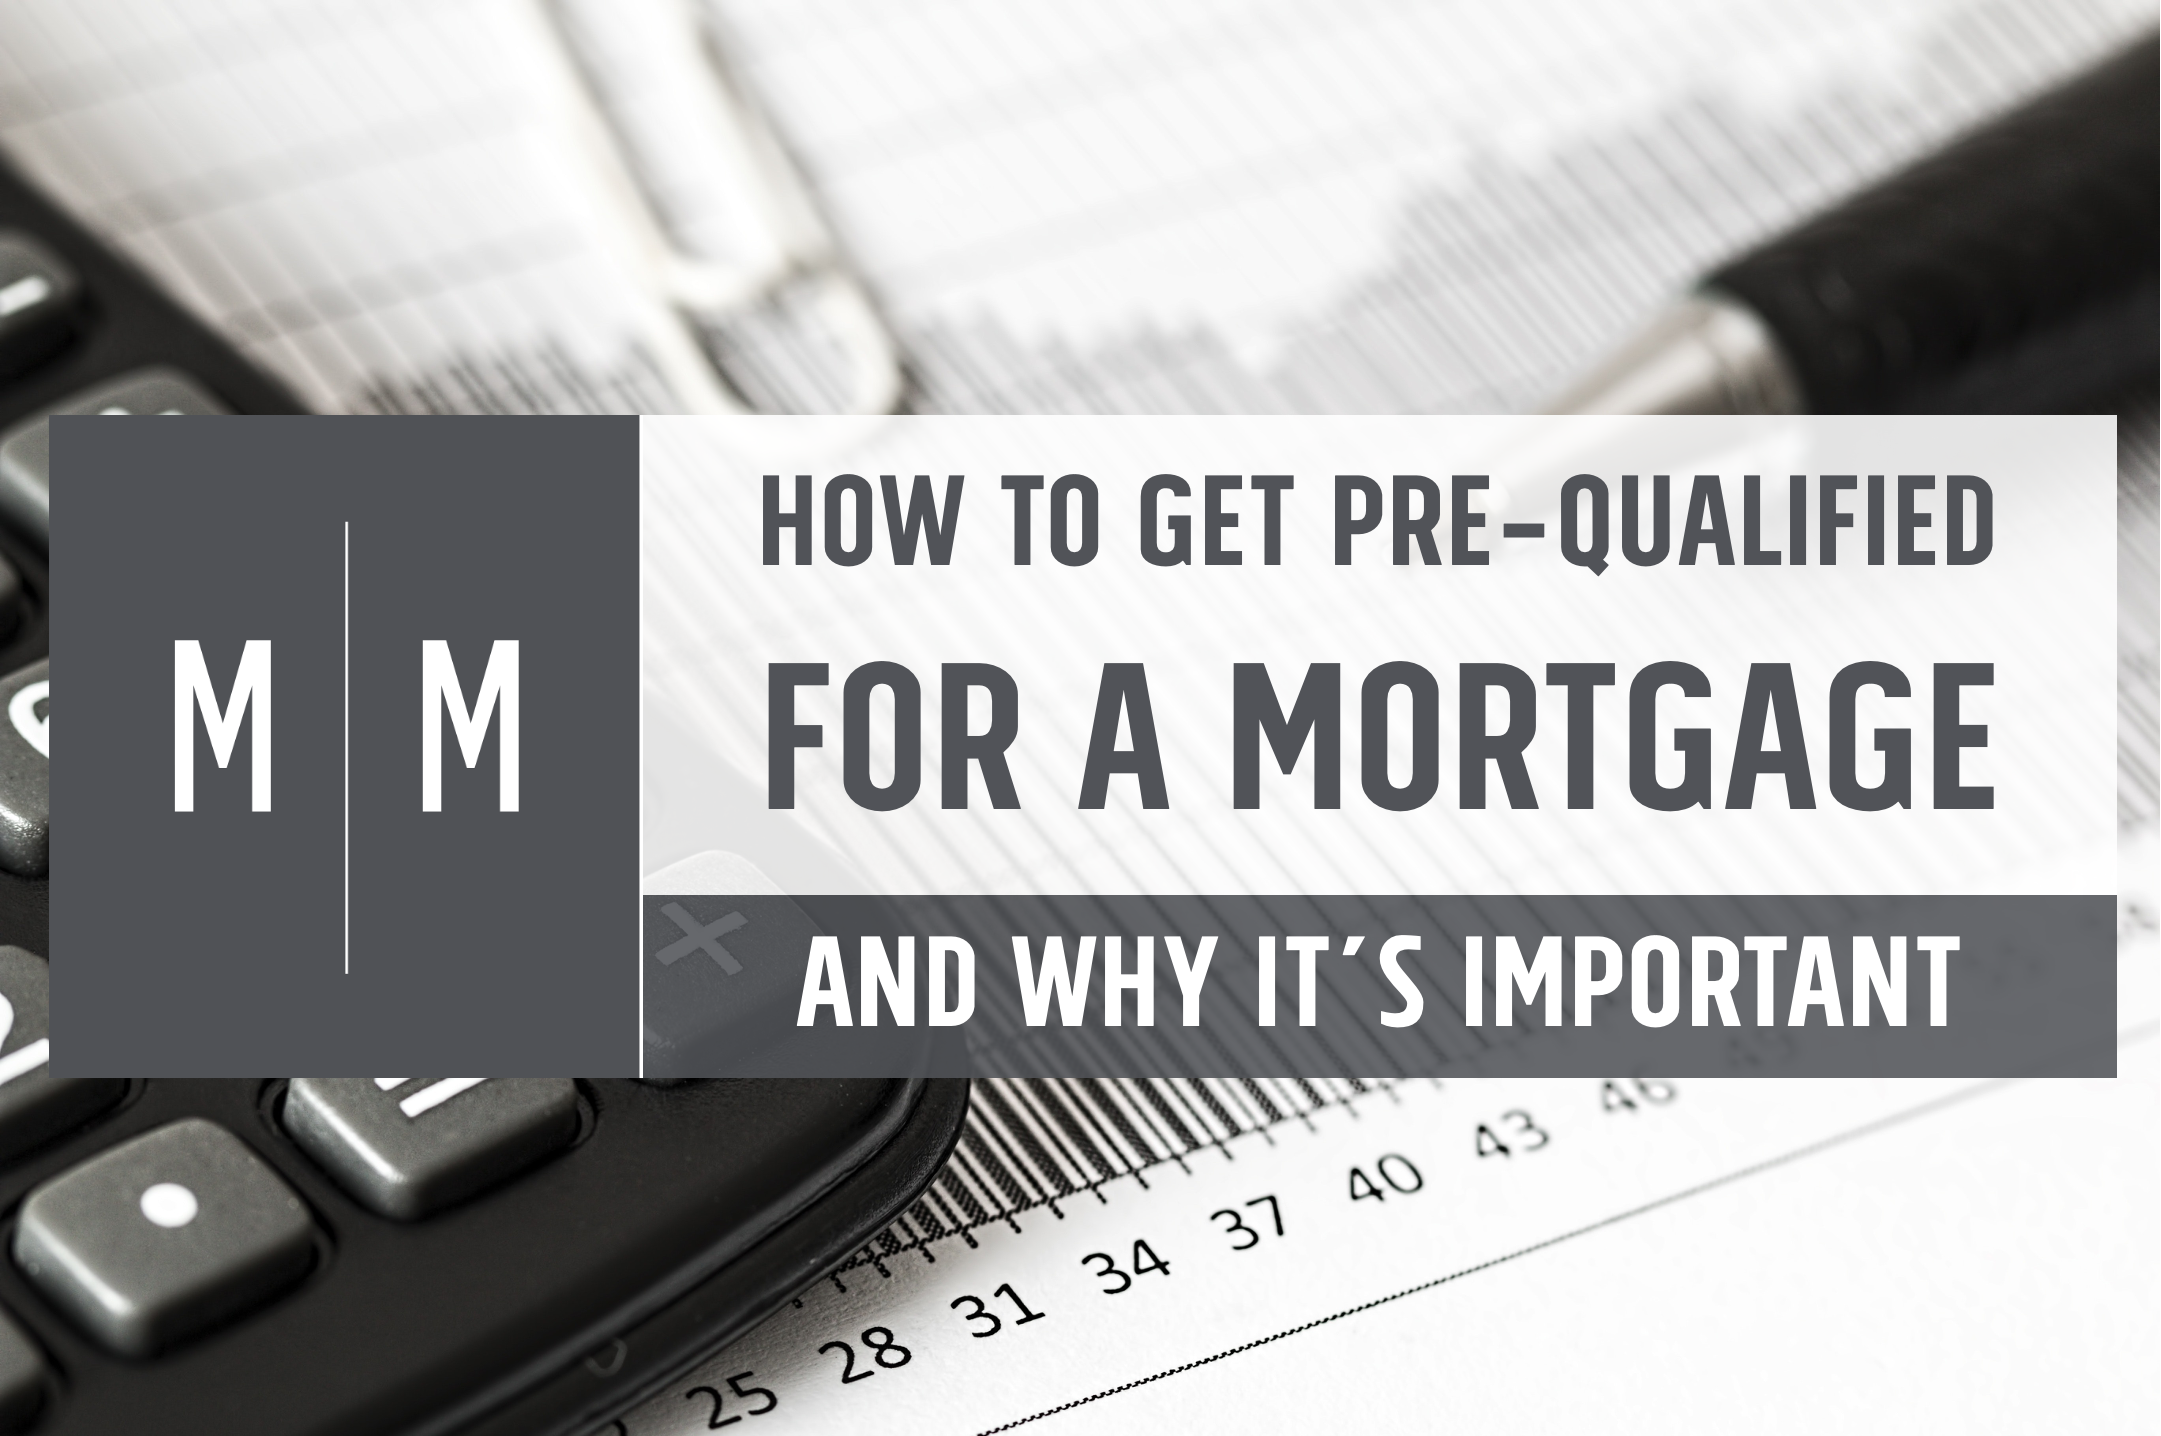 How to get pre-qualified for a mortgage and why it's important